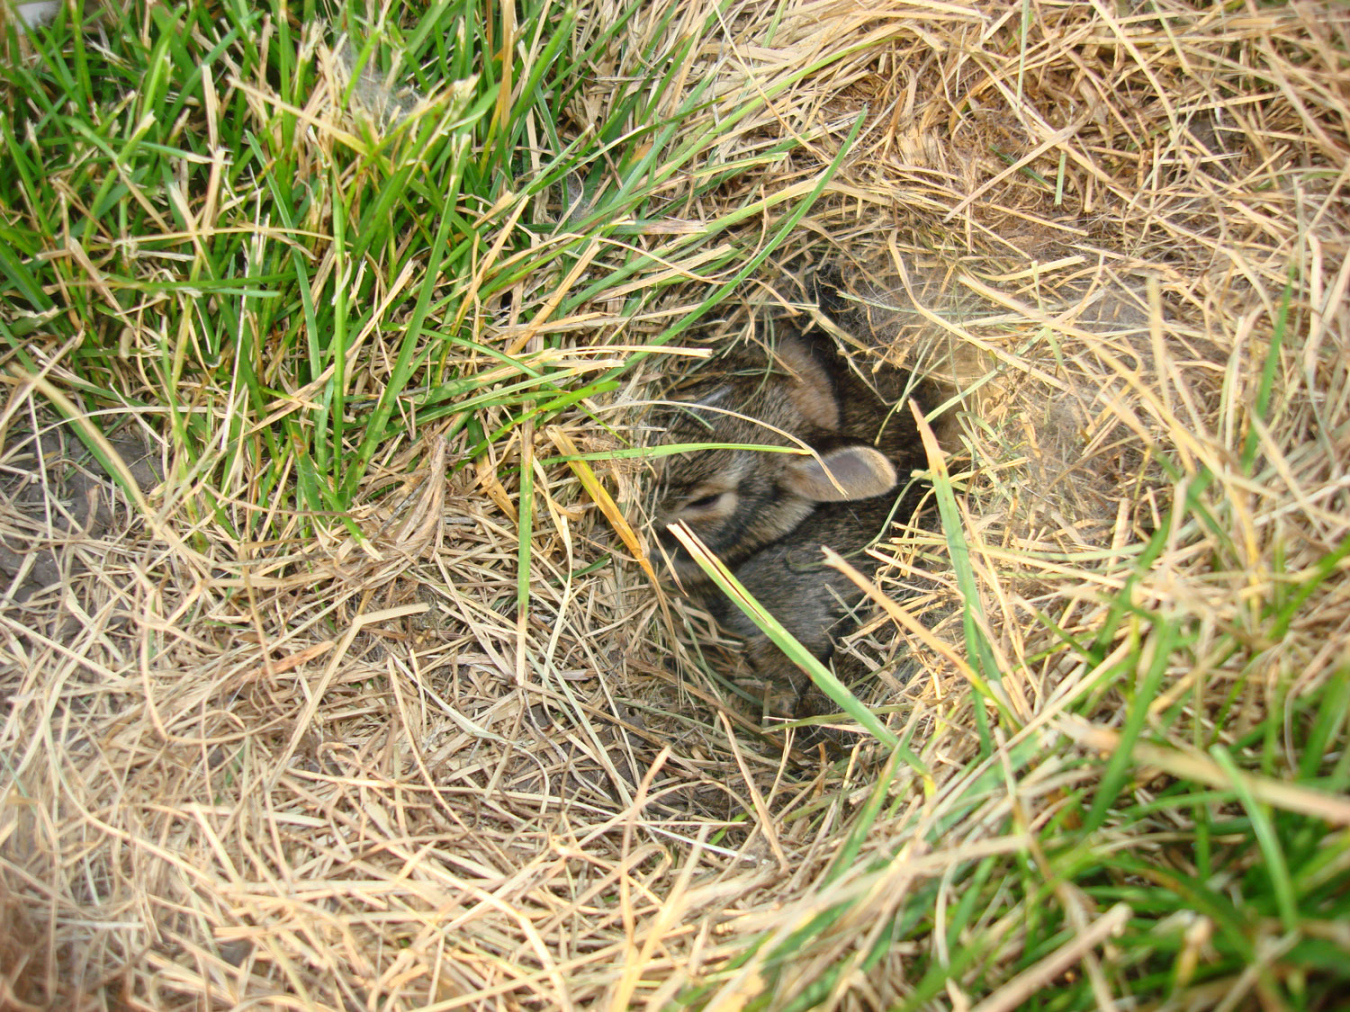 Save yourself from heartbreak: Check your yard for rabbit nests